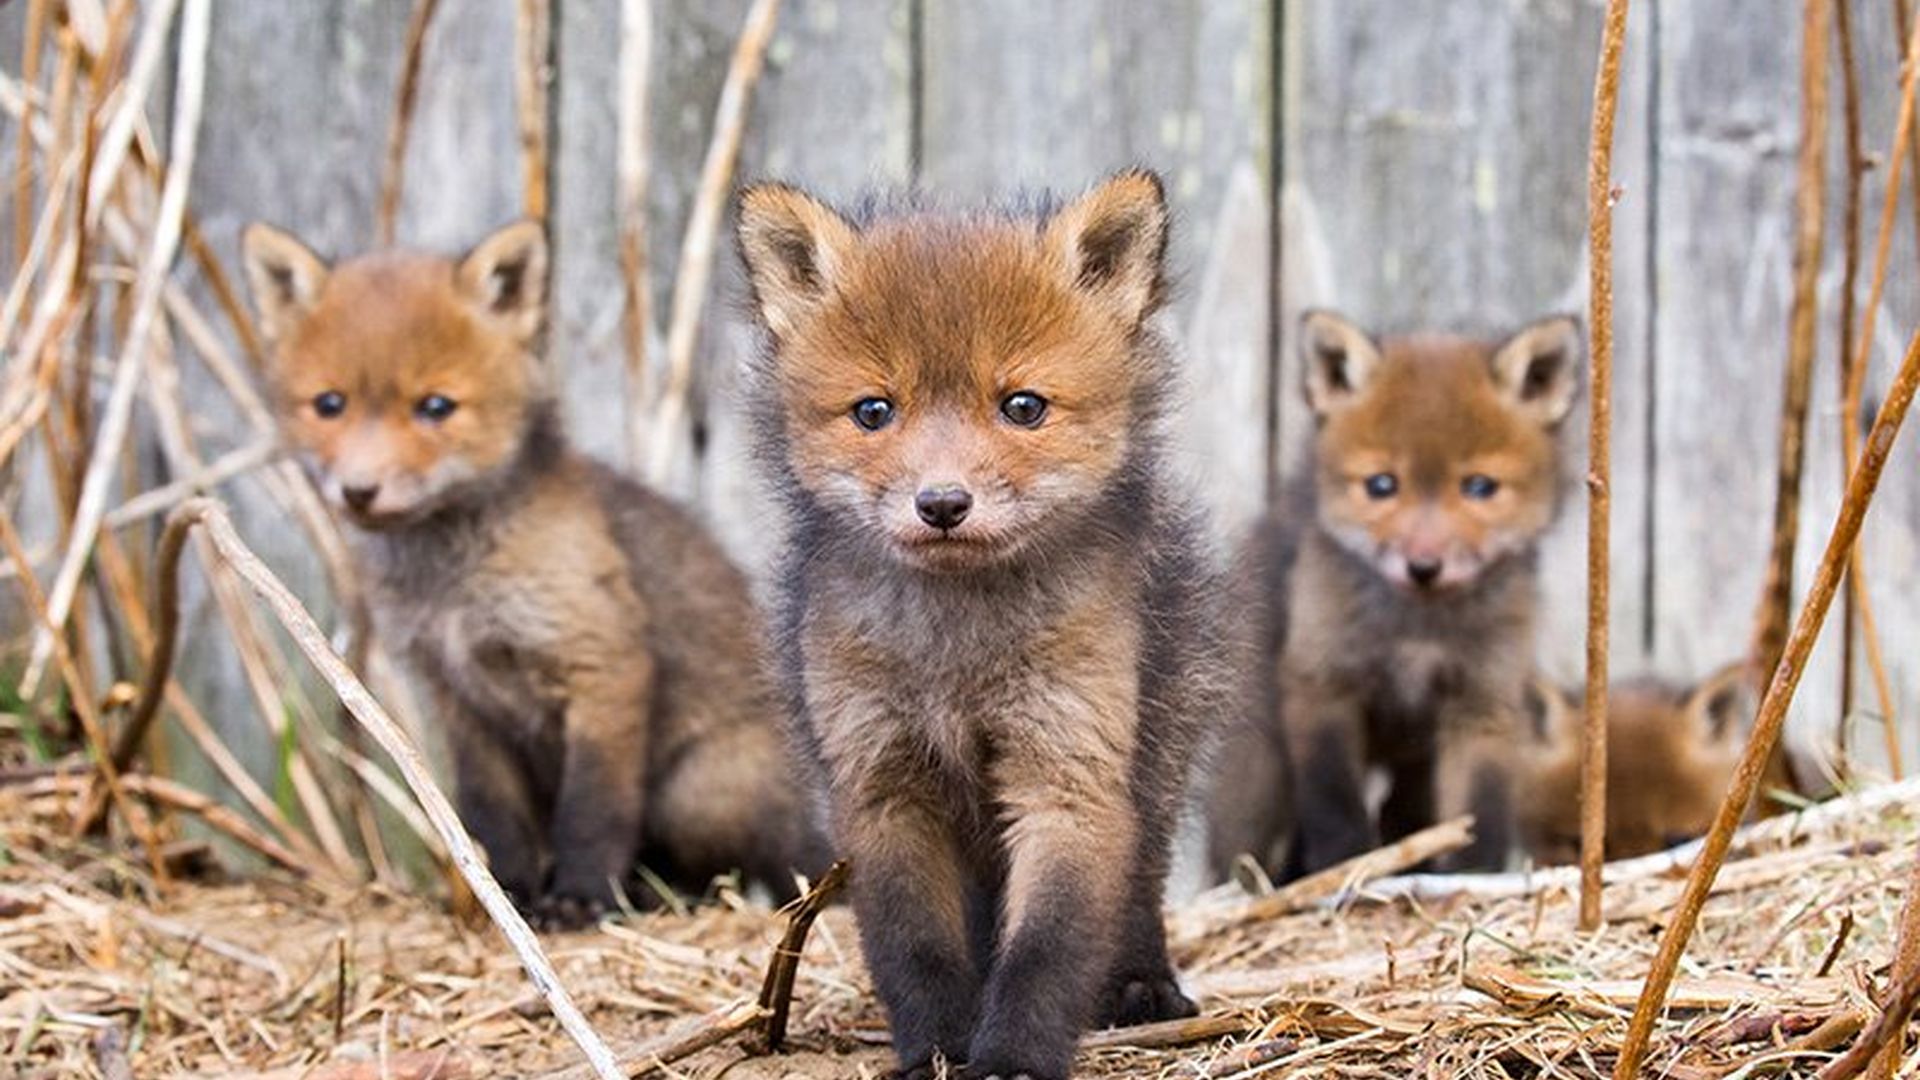 Three fox cubs play walk towards us and one crouches behind, all of them in front of a wooden fence.